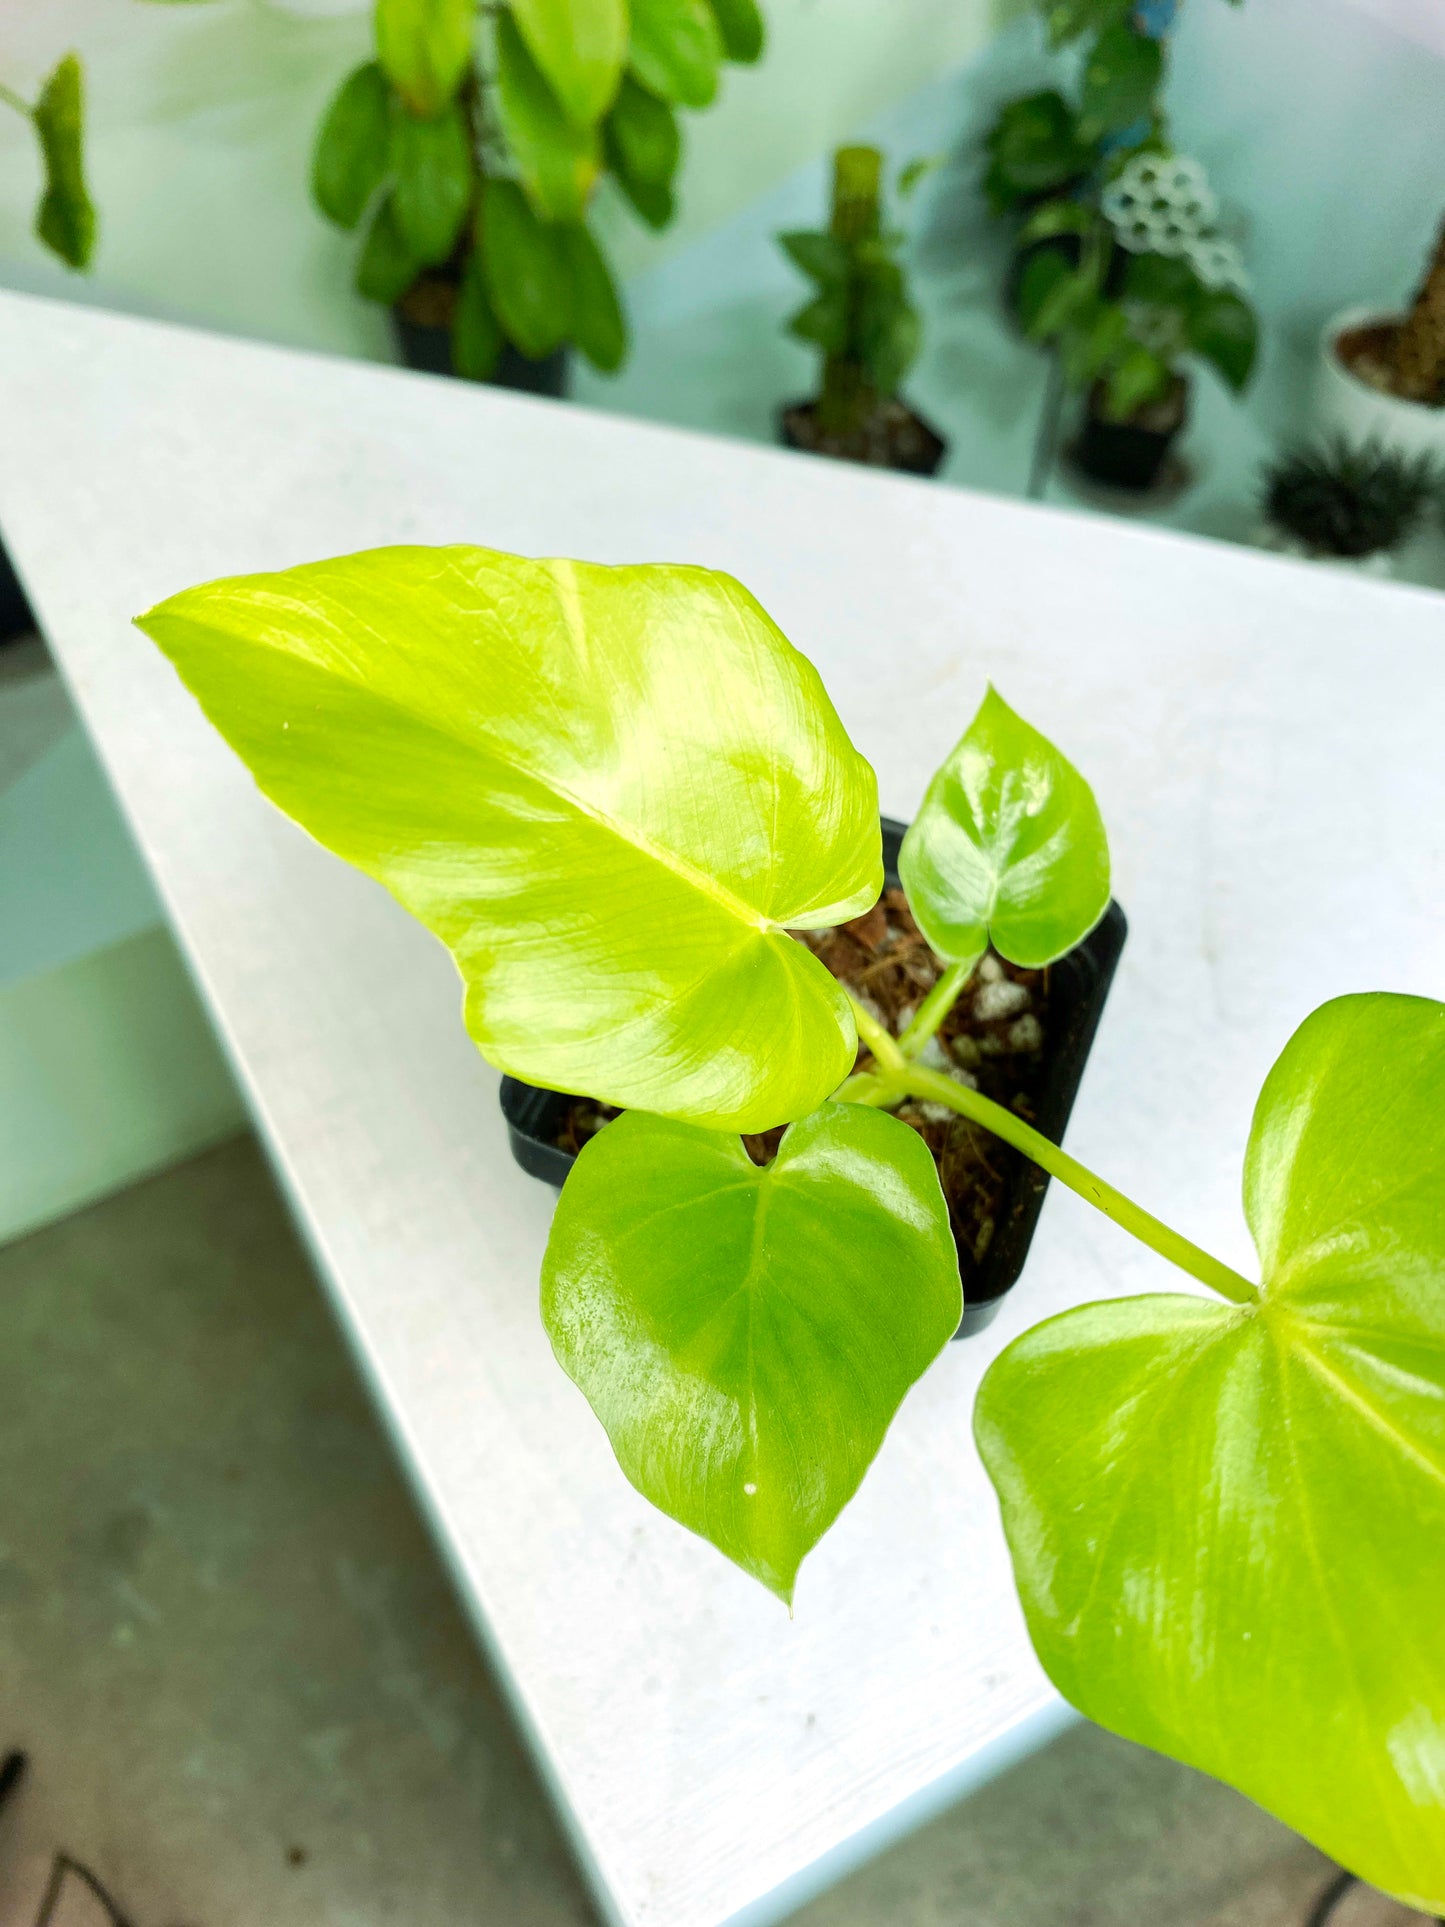 Philodendron warscewiczii "Aurea Flavum" (3:E50) [1122] | US Seller | Exact Plant | In-Stock